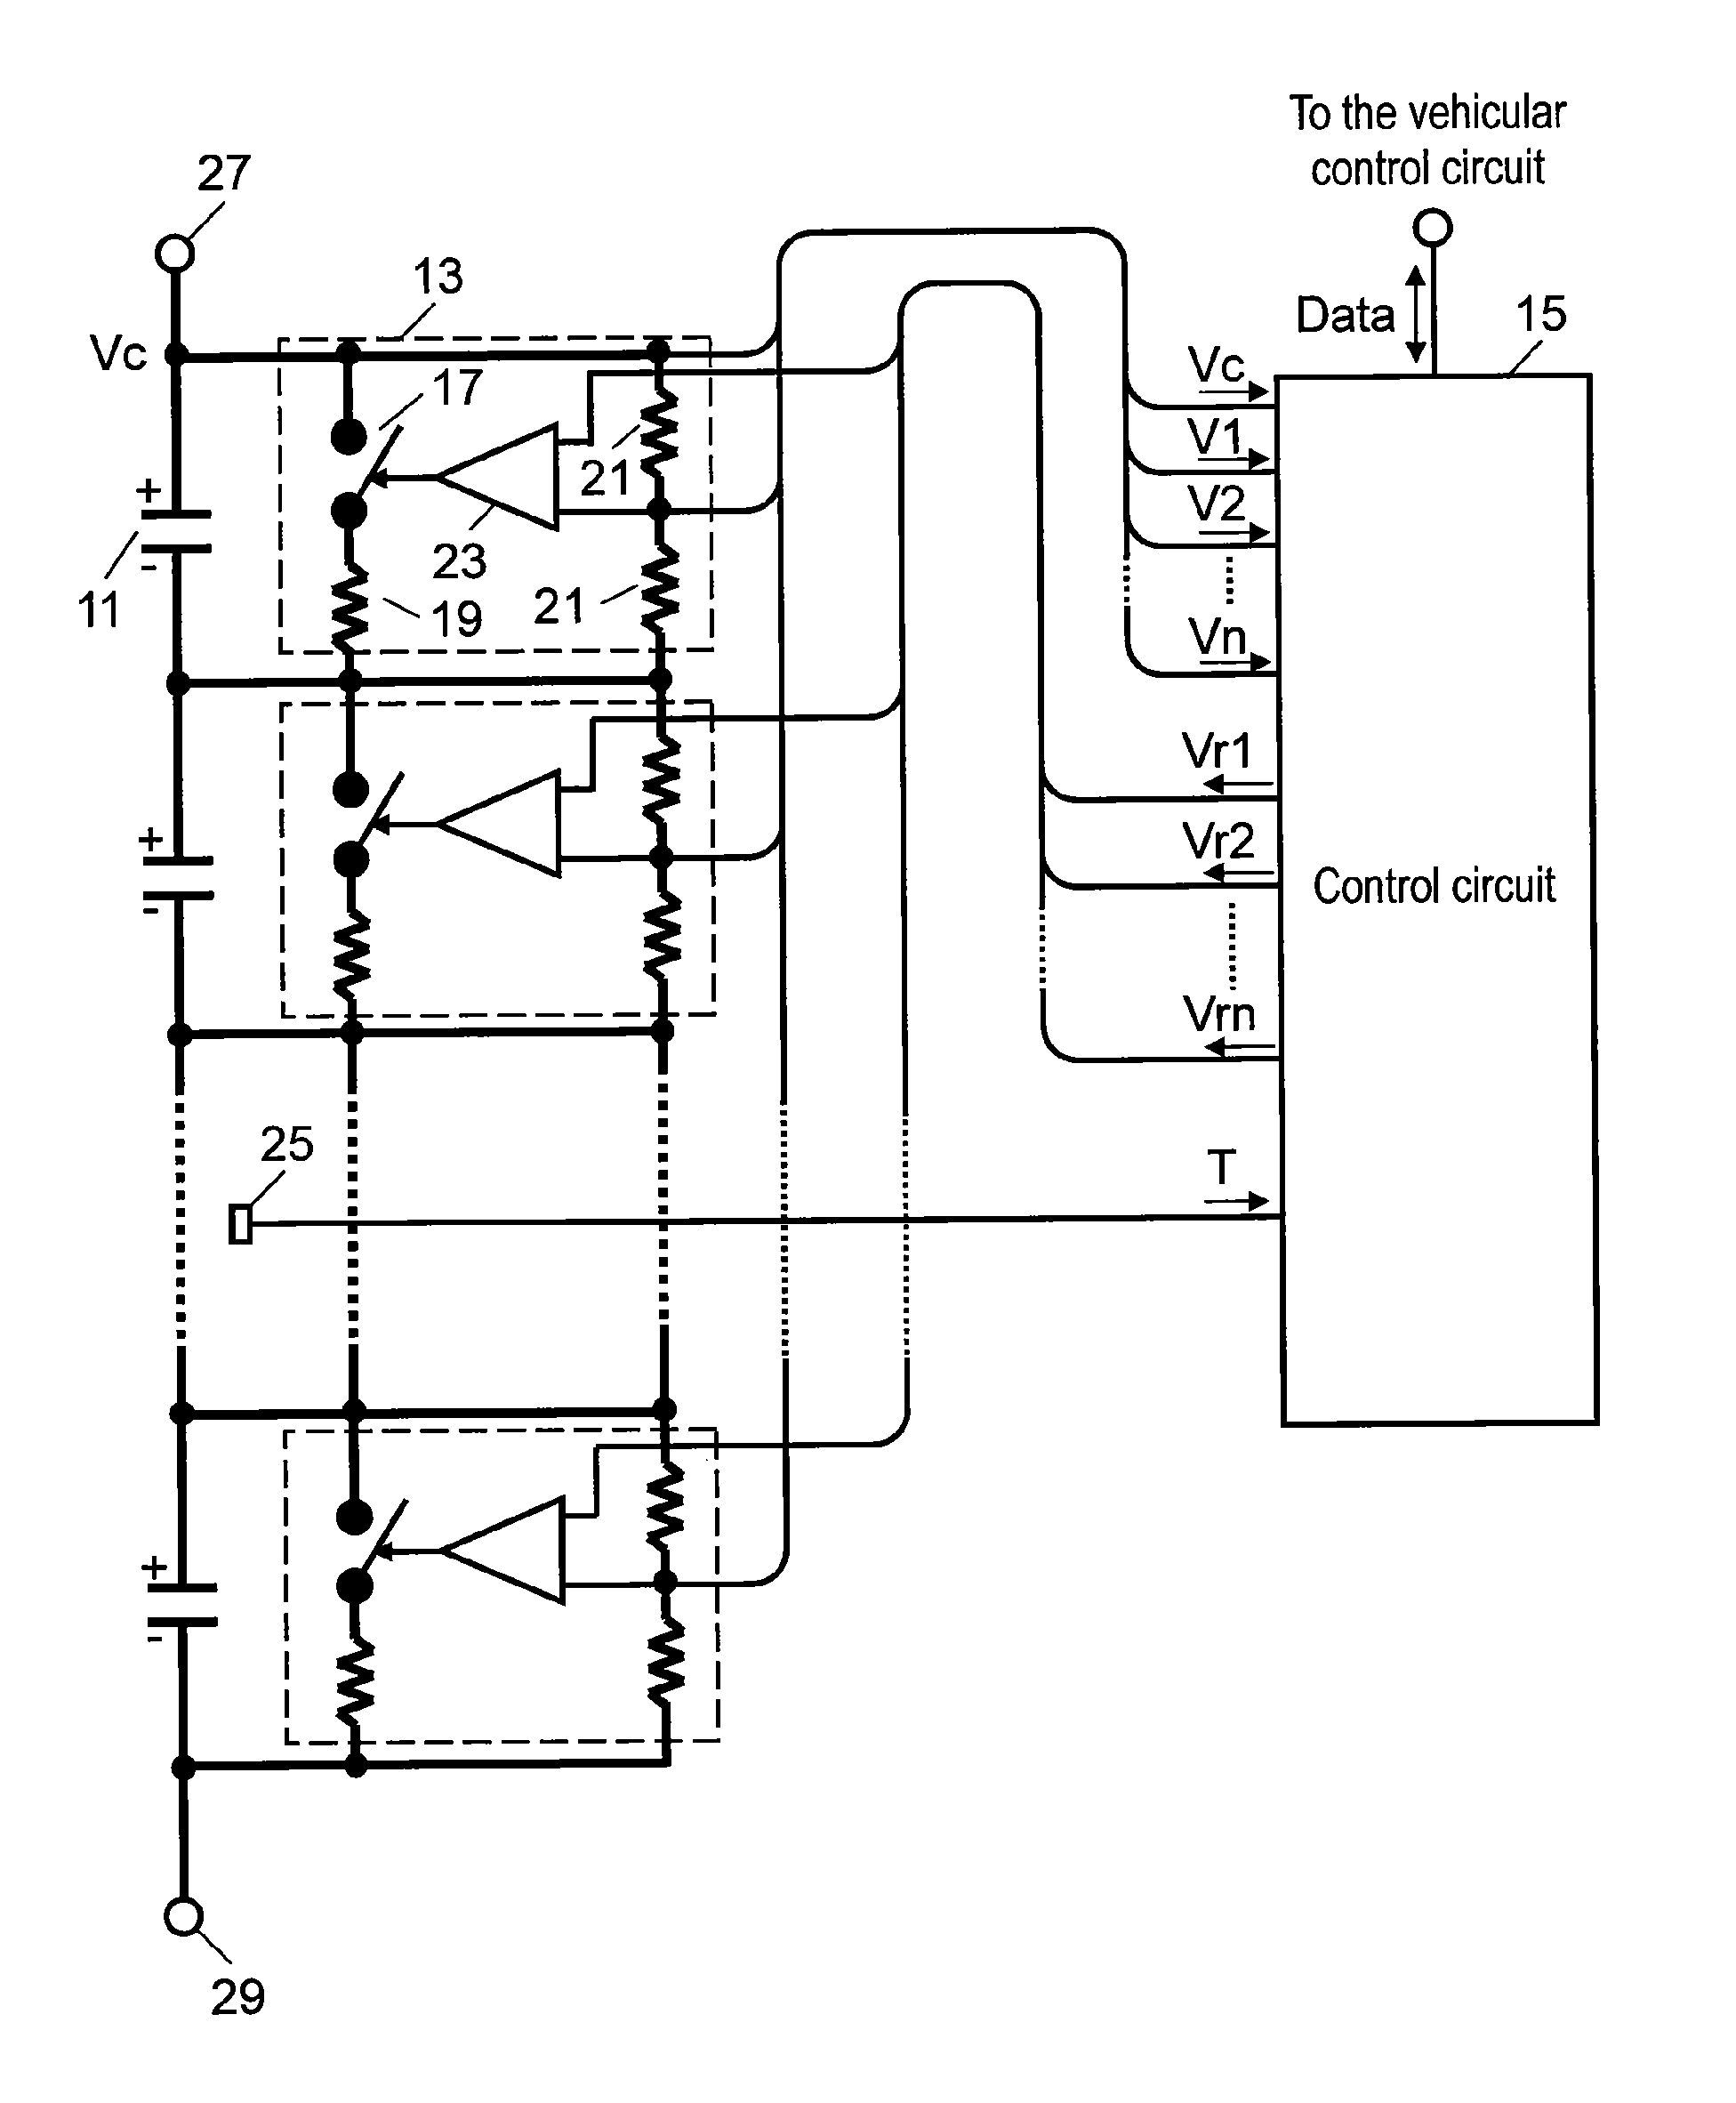 Electricity accumulating device